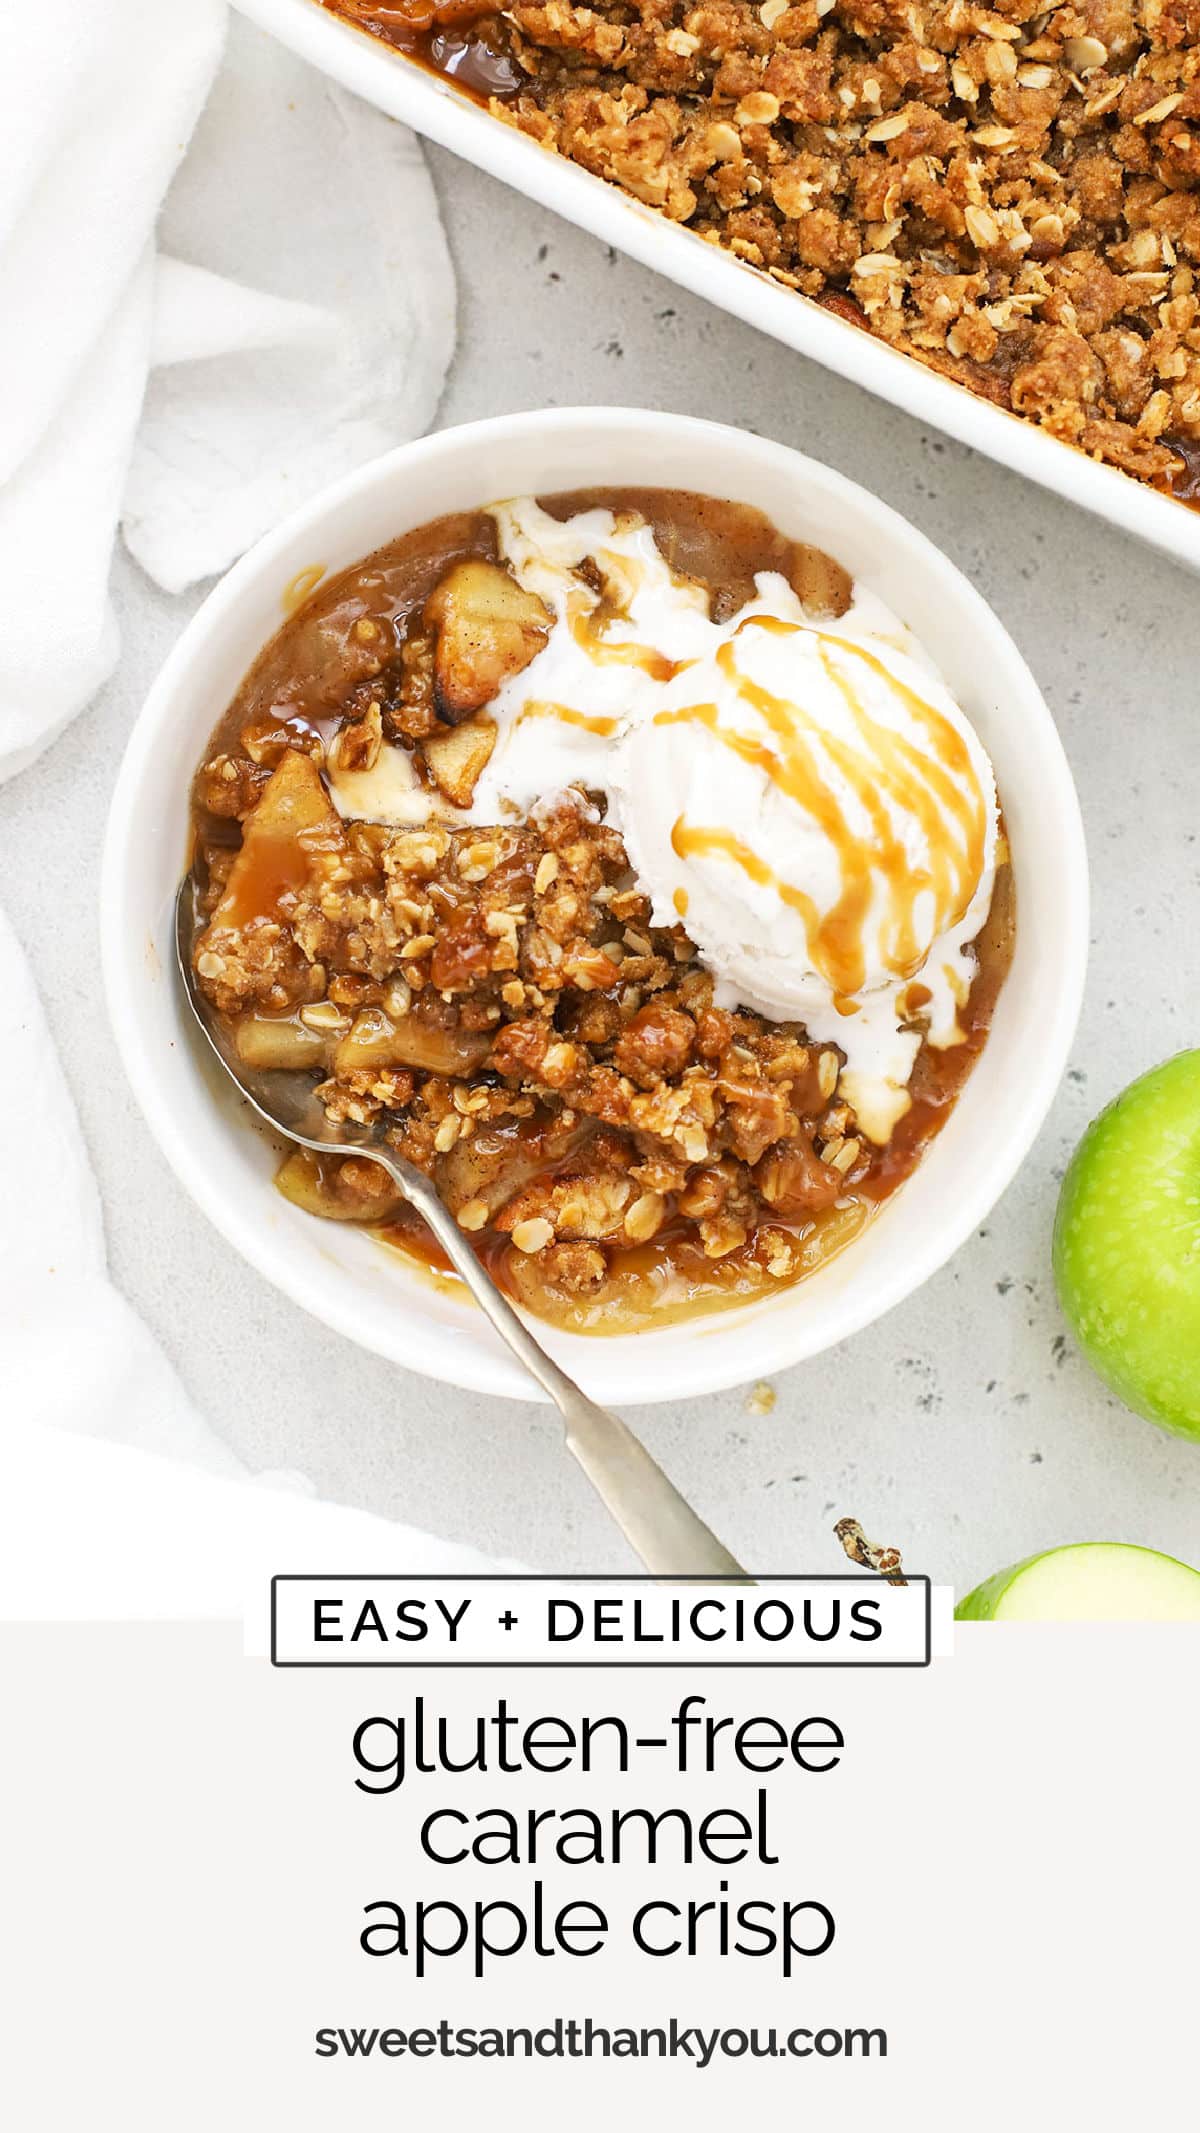 This Gluten-Free Caramel Apple Crisp recipe is the perfect fall dessert, made with sweet apples, crispy oat crumble & gooey caramel! / gluten free apple crisp with caramel sauce / salted caramel apple crisp / apple crisp with caramel sauce / gluten free apple crisp recipe / easy gluten free apple crisp / gluten free apple dessert / gluten free thanksgiving dessert / gluten free fruit crisp / 